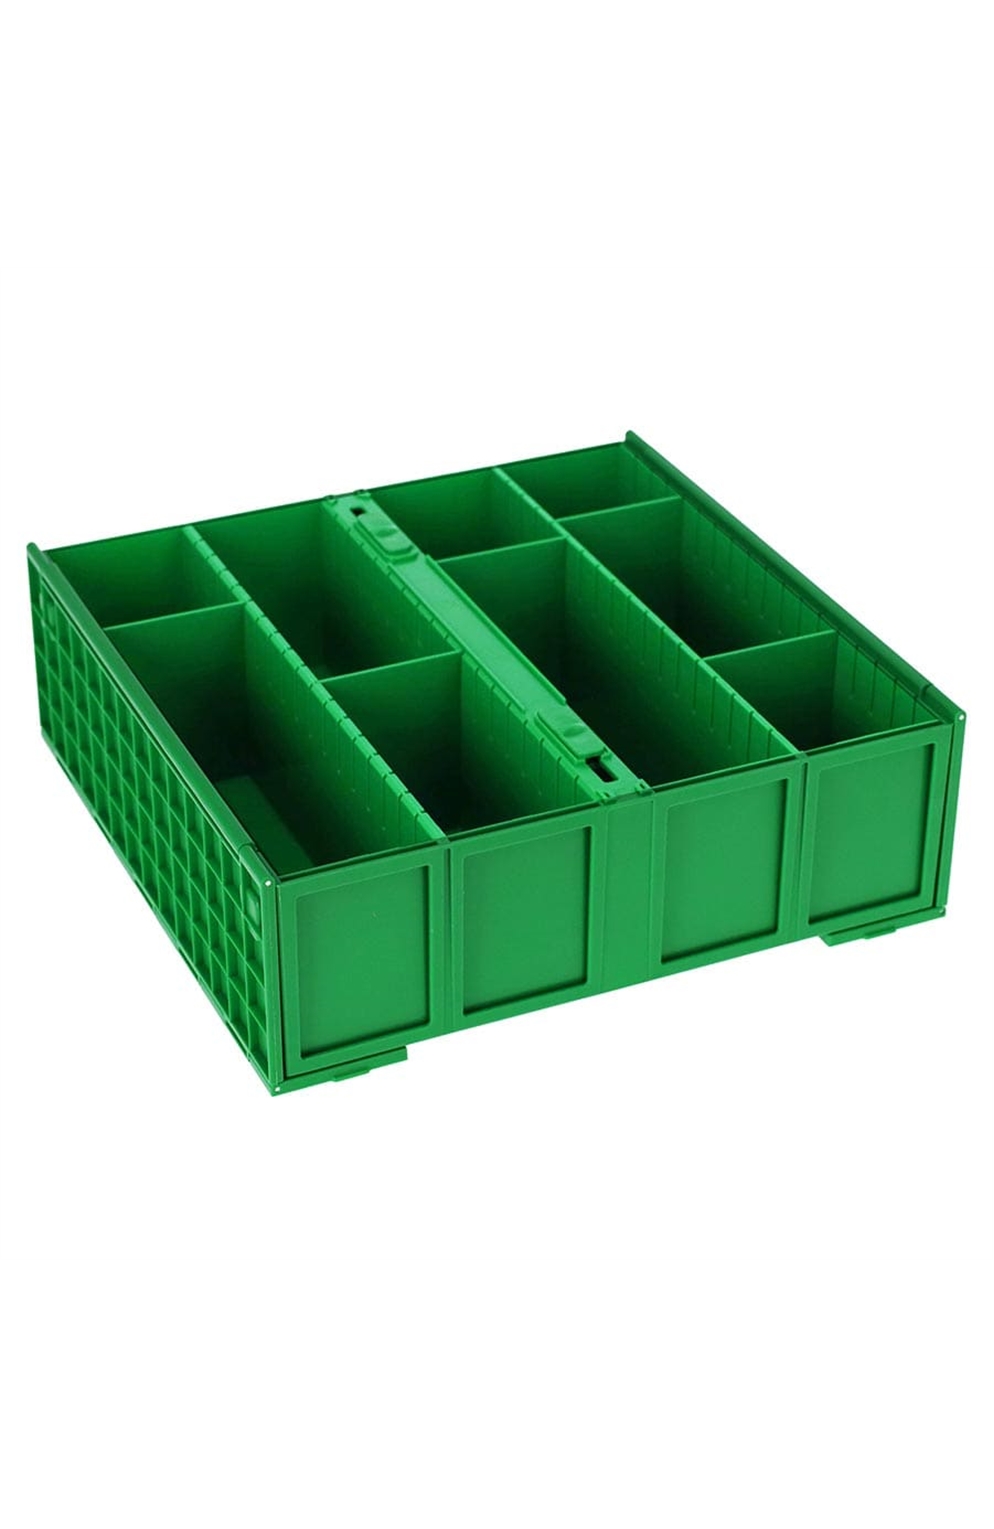 Collectible Card Bin - Green (3200 Count)